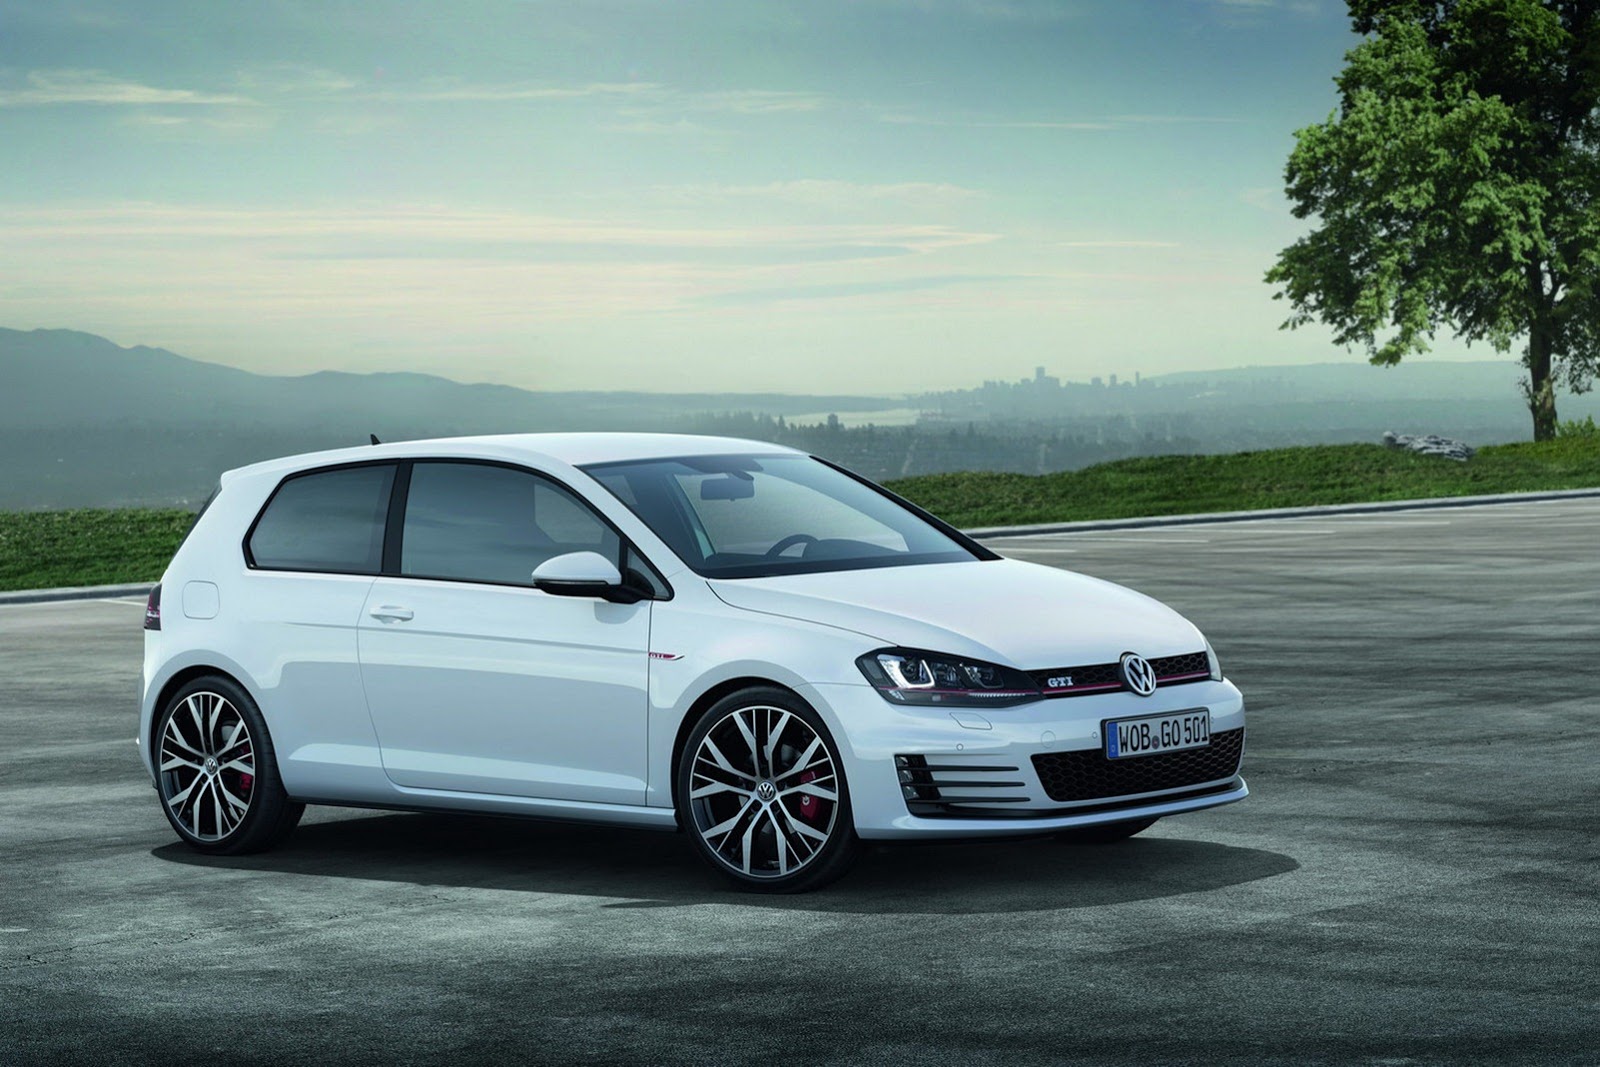 The Mk7 Volkswagen Golf Gti Looks Almost Identical To Concept